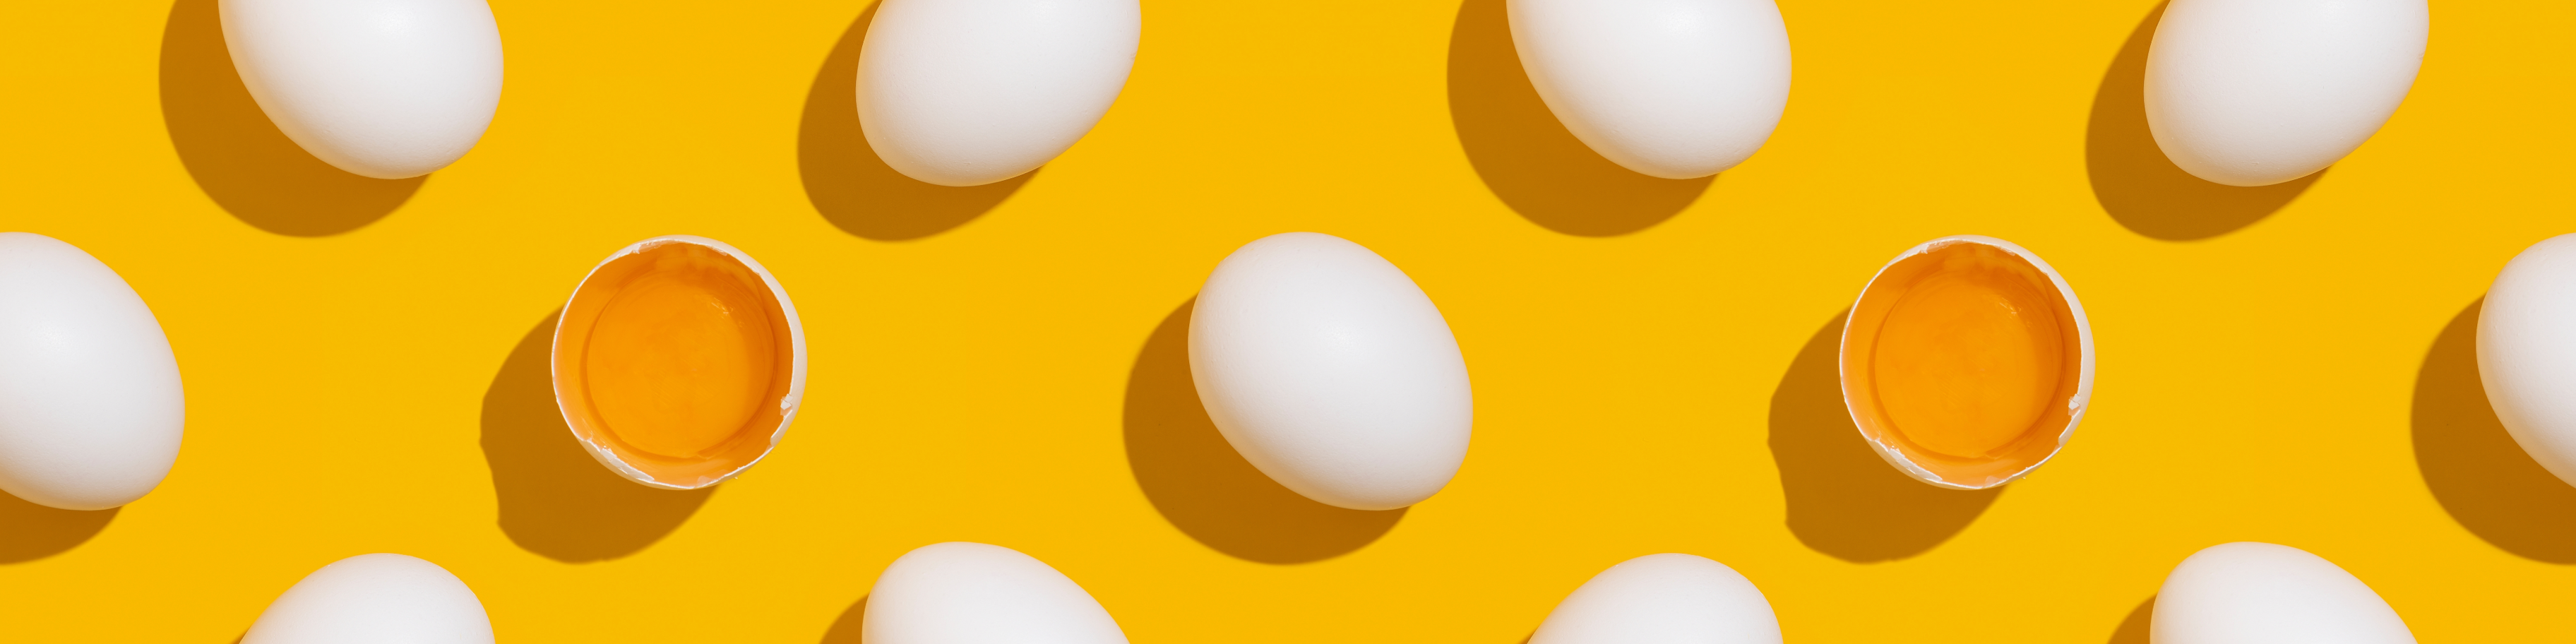 Eggs scattered on a yellow background.